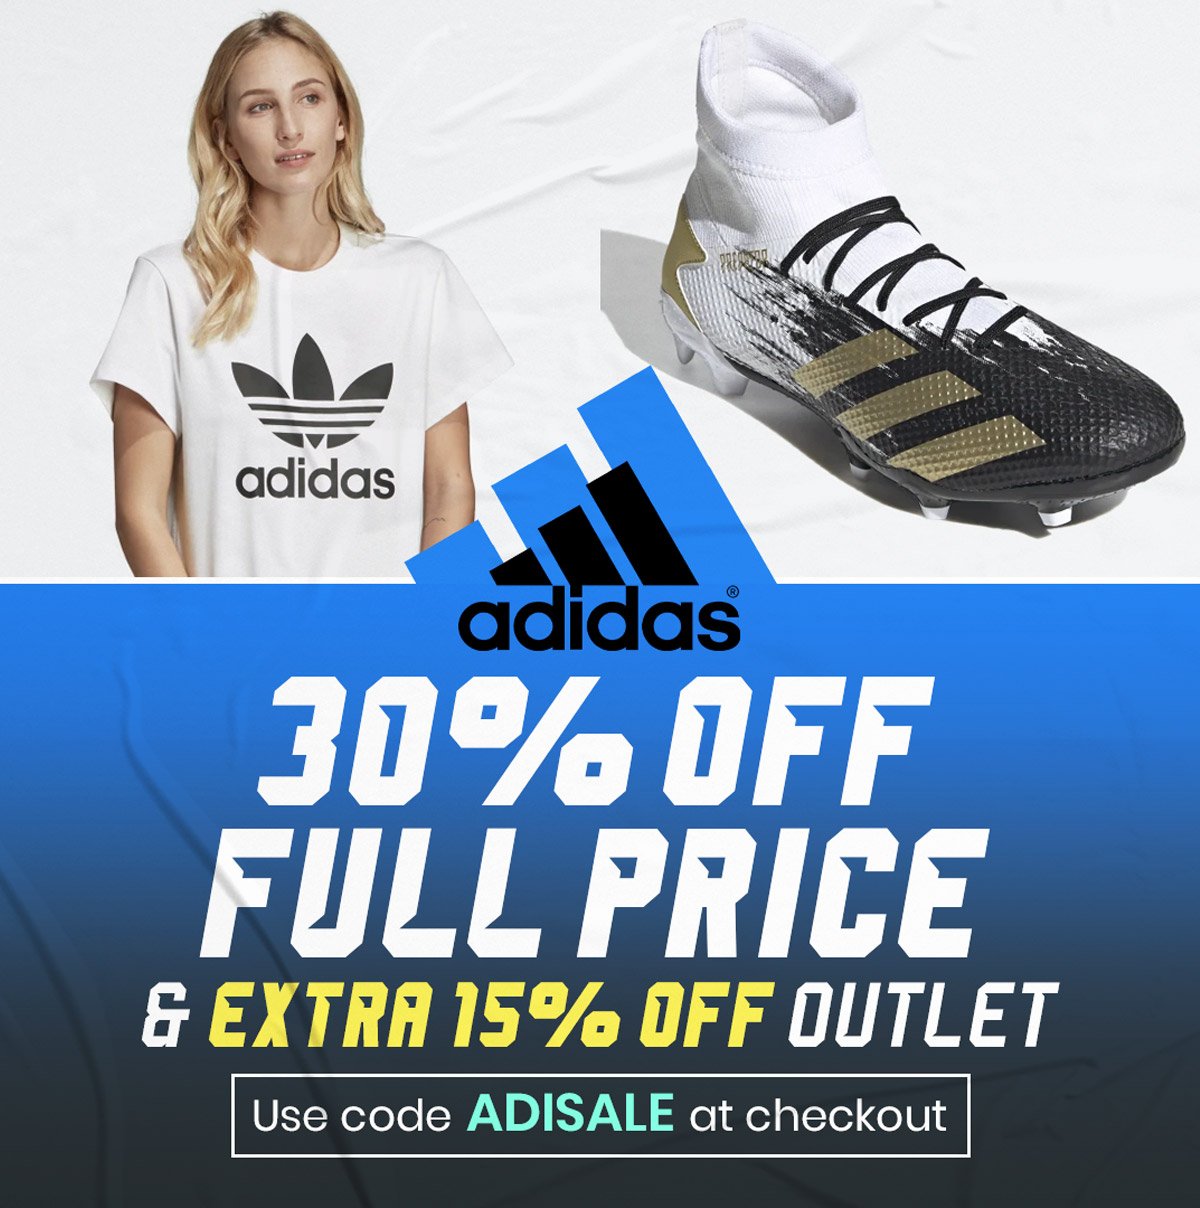 adidas discount code outlet